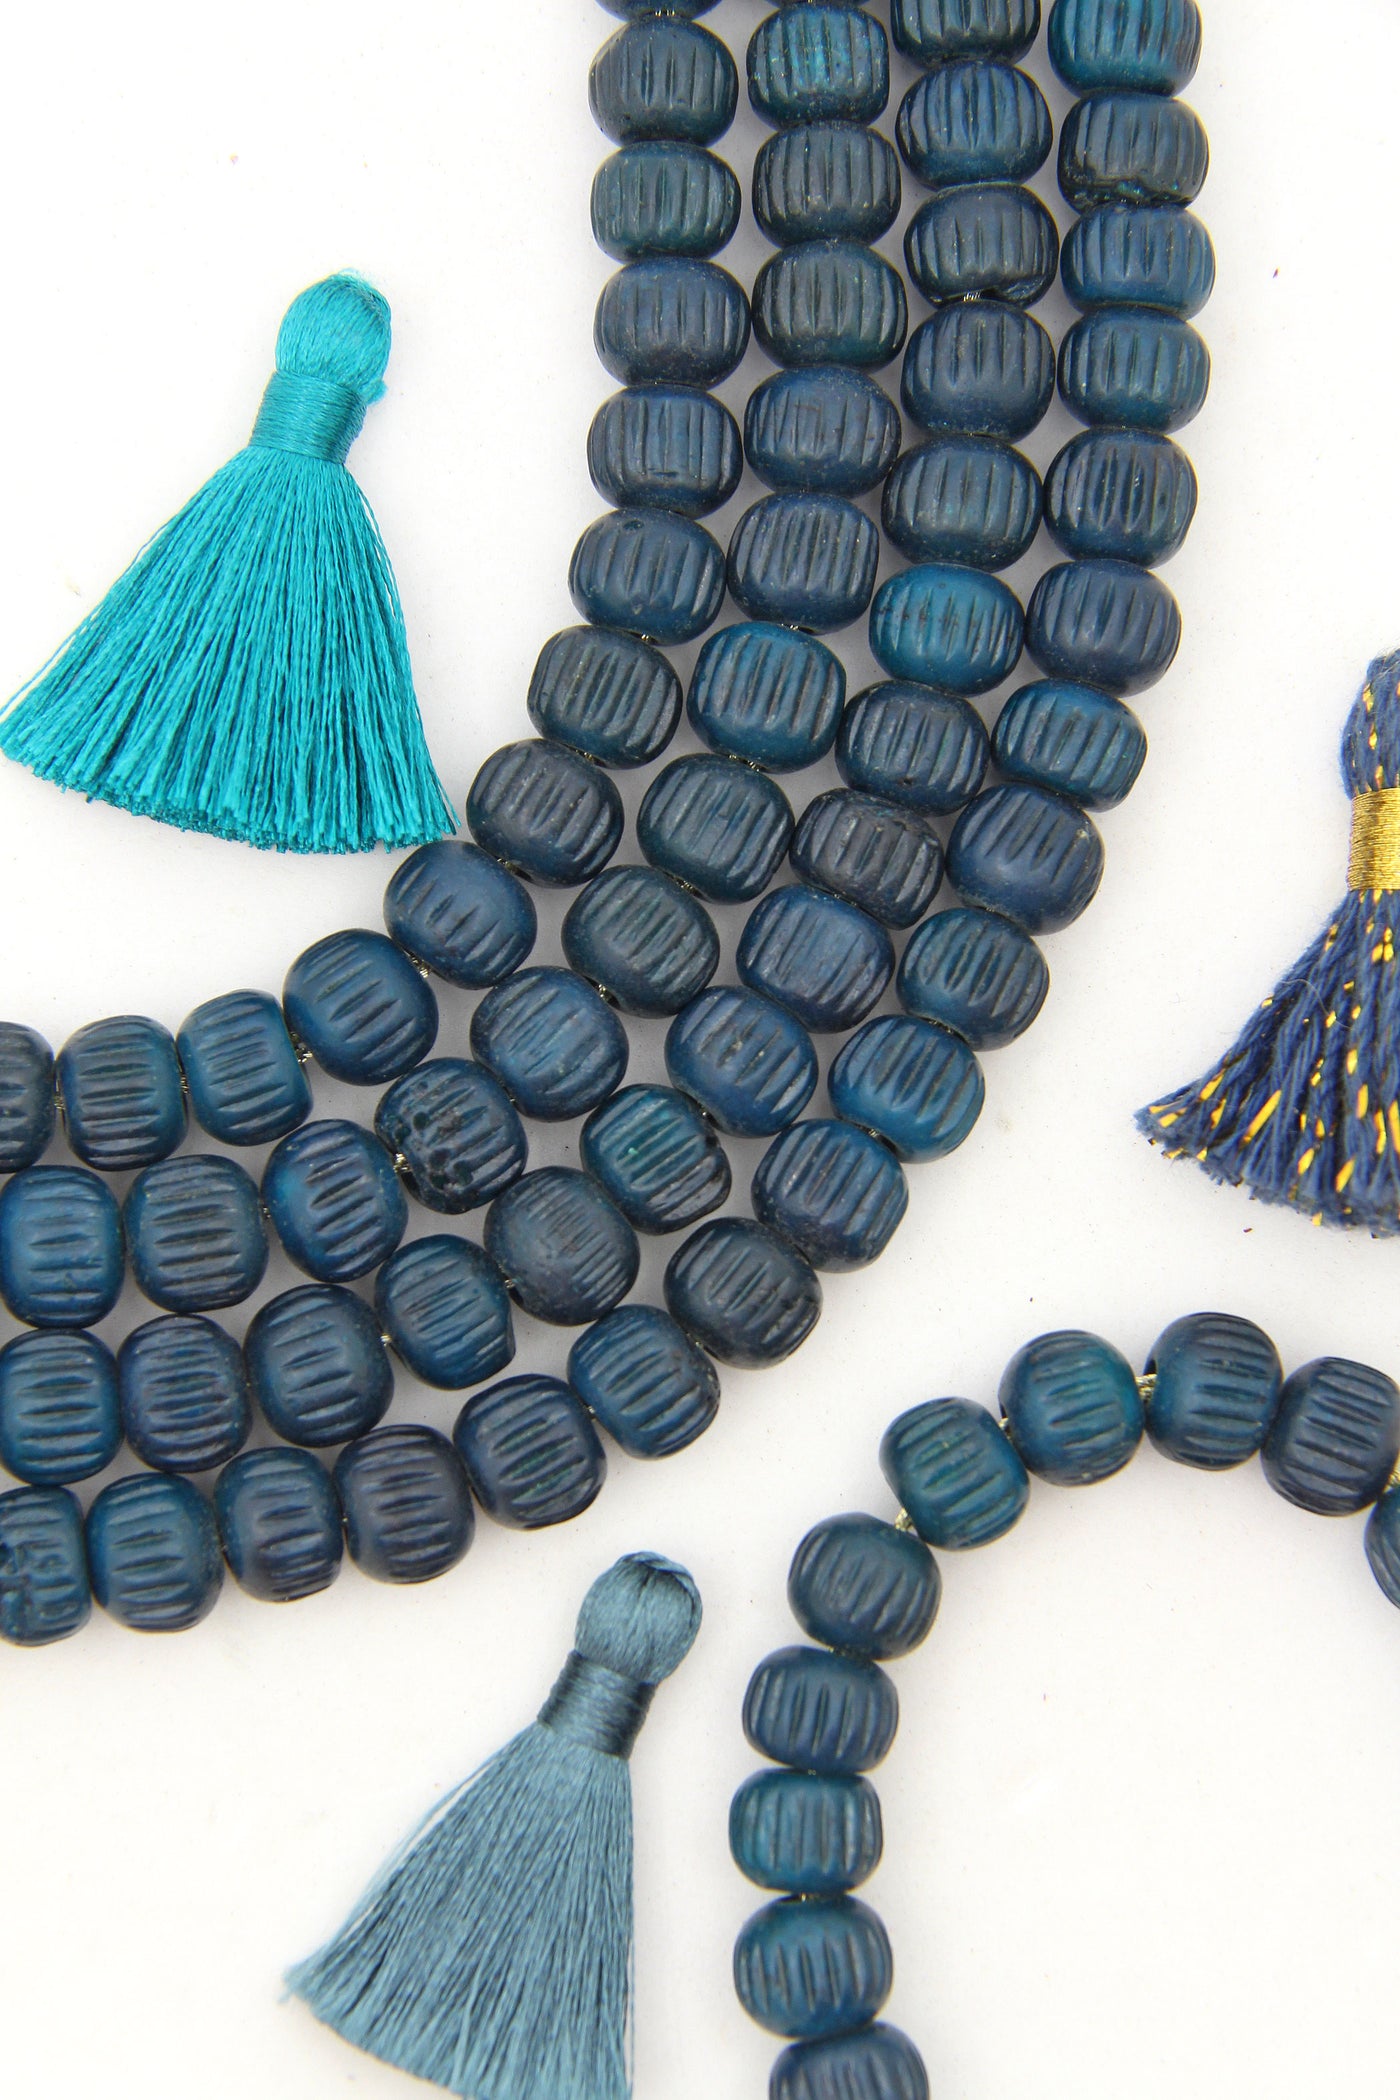 Looking for earthy and richly colored beads for making jewelry? 